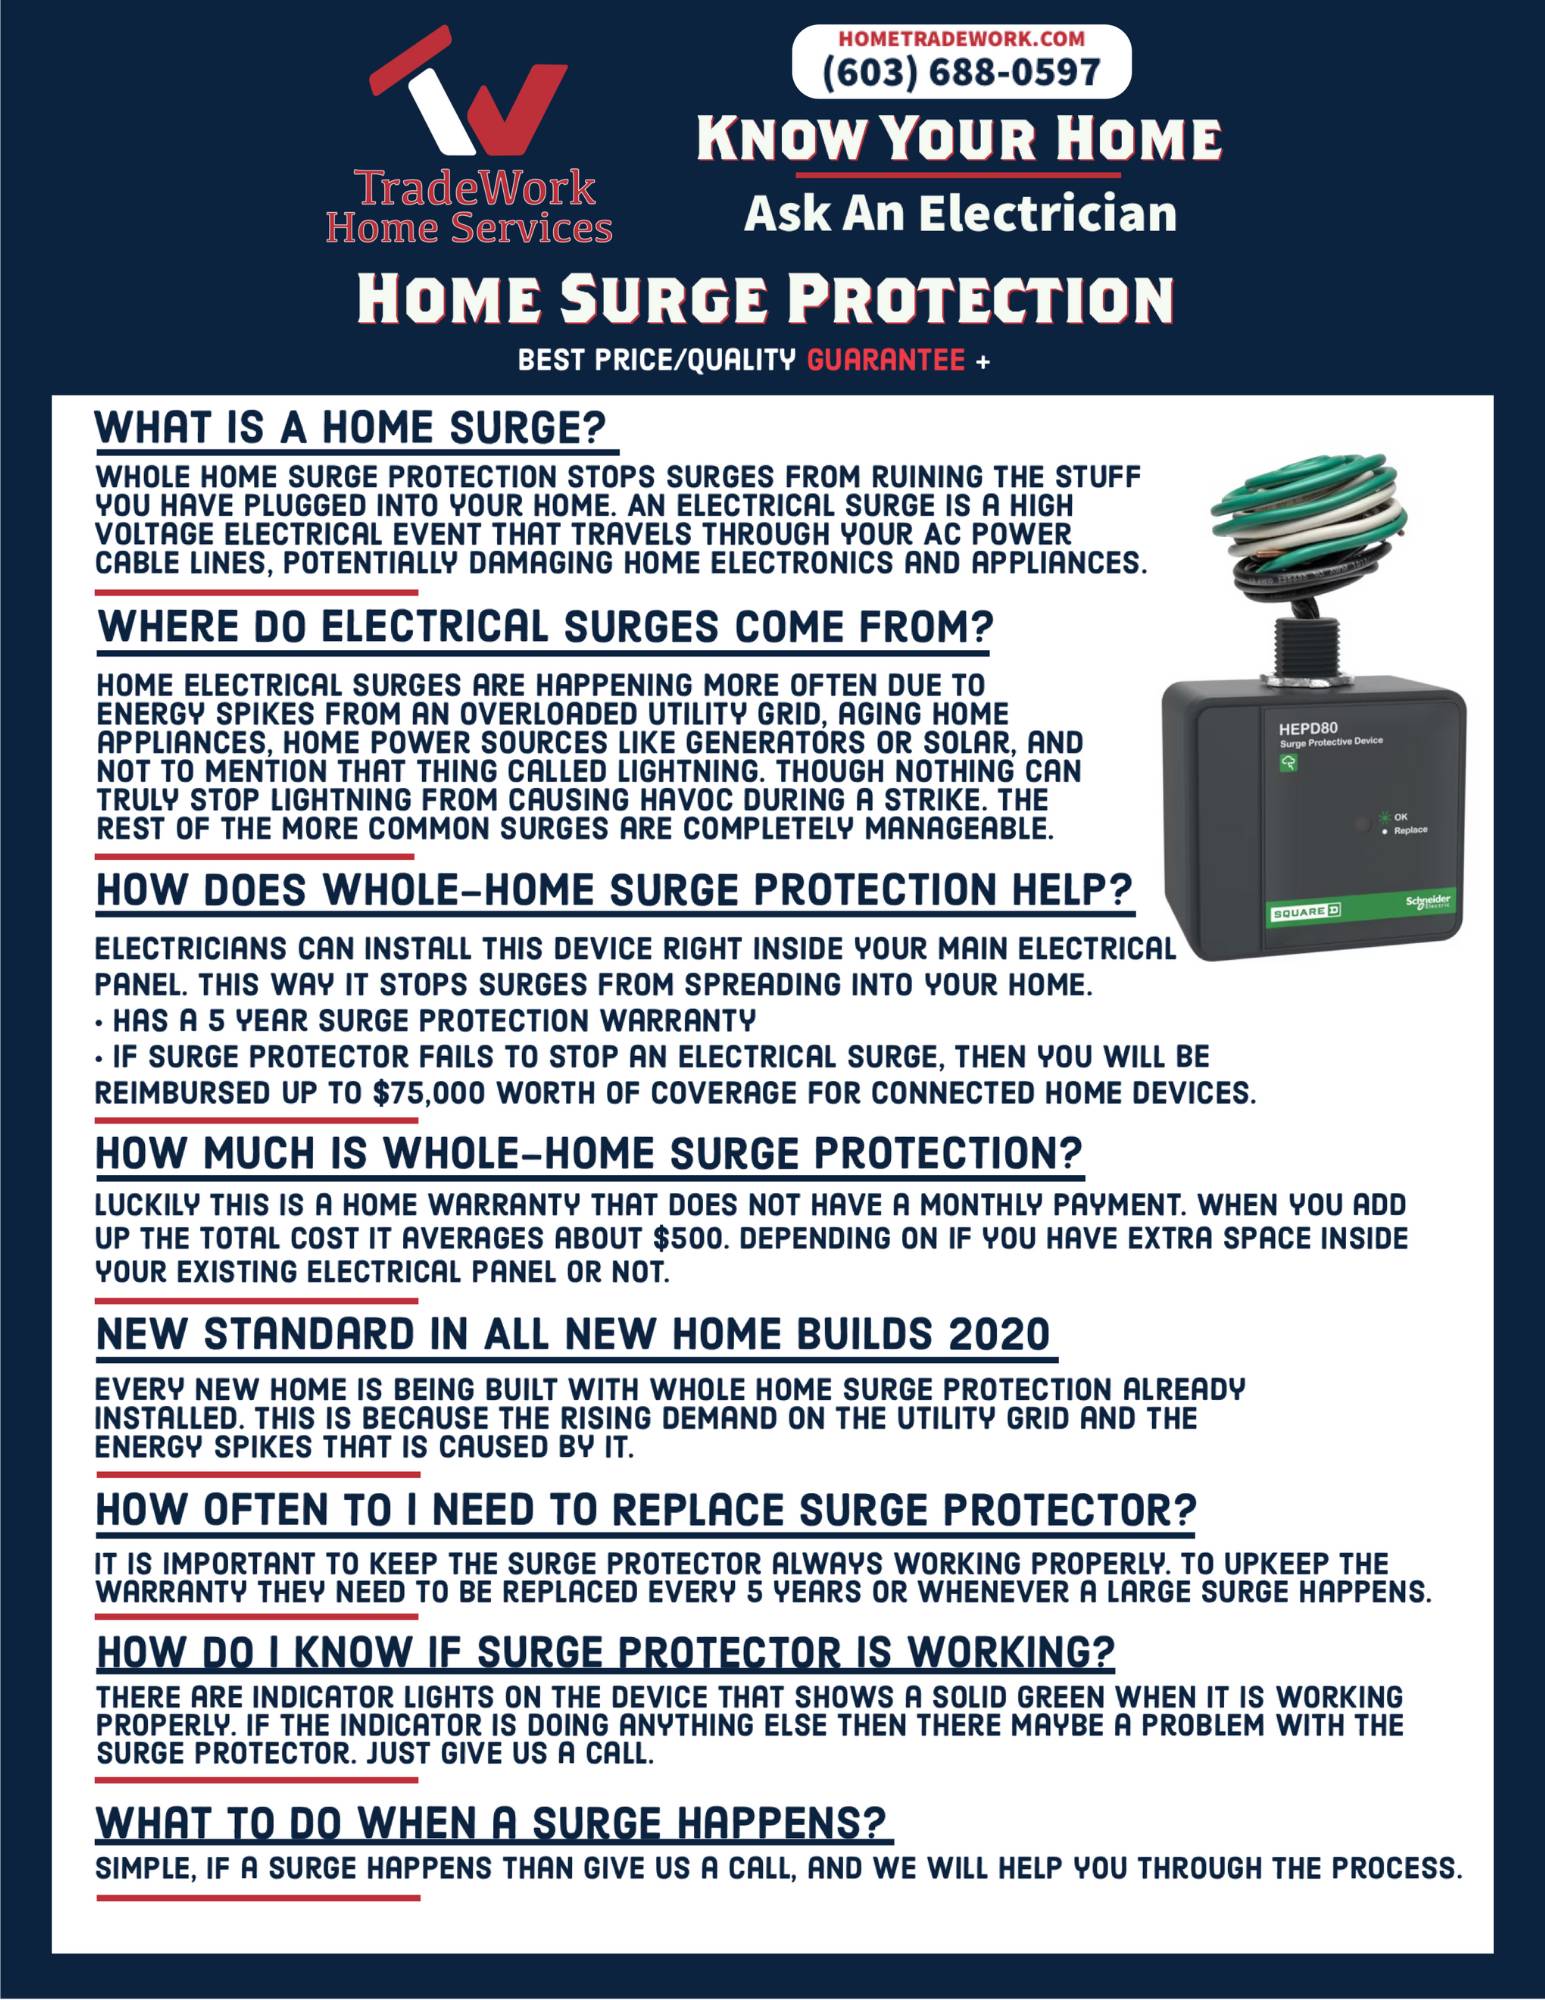 Is Whole Home Surge Protection Worth It?